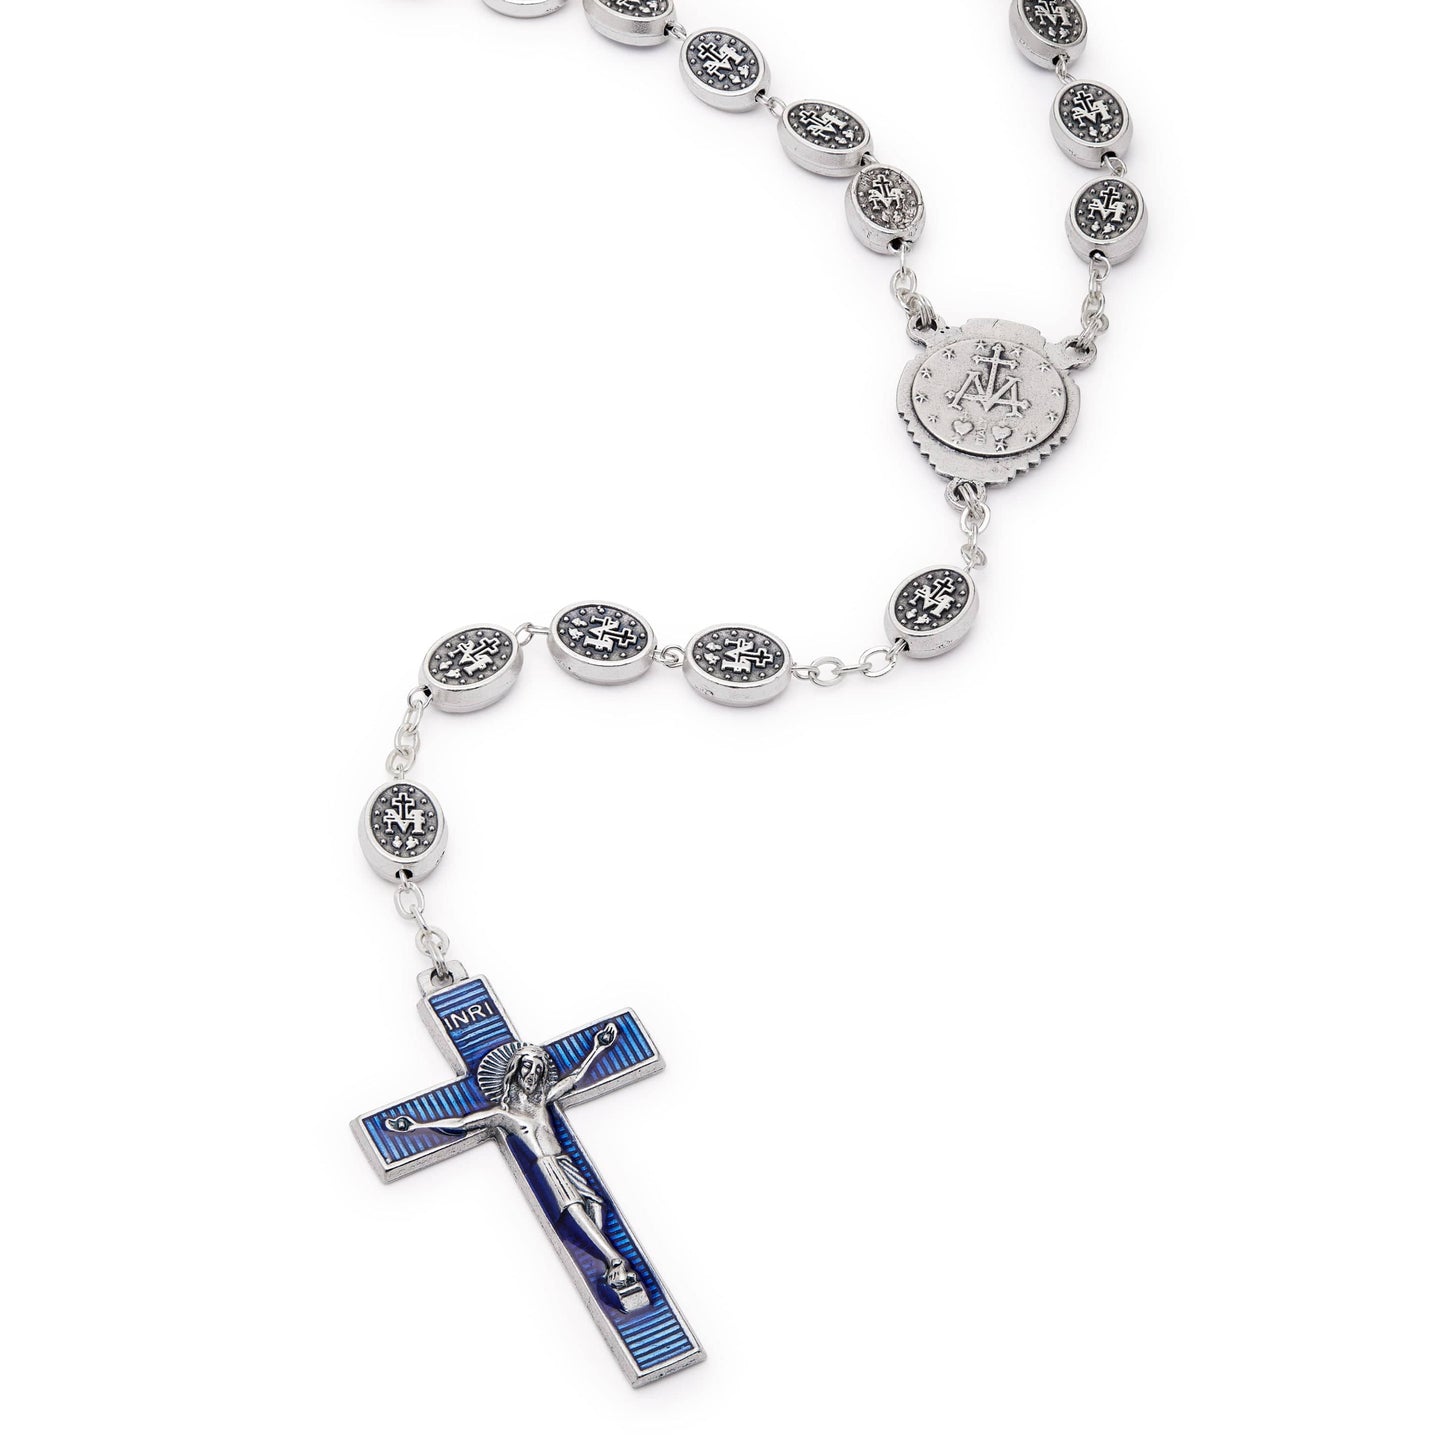 MONDO CATTOLICO Prayer Beads 61 cm (24 in) / 10 mm (0.39 in) Miraculous Virgin Rosary in Blue Enamel Oval Beads